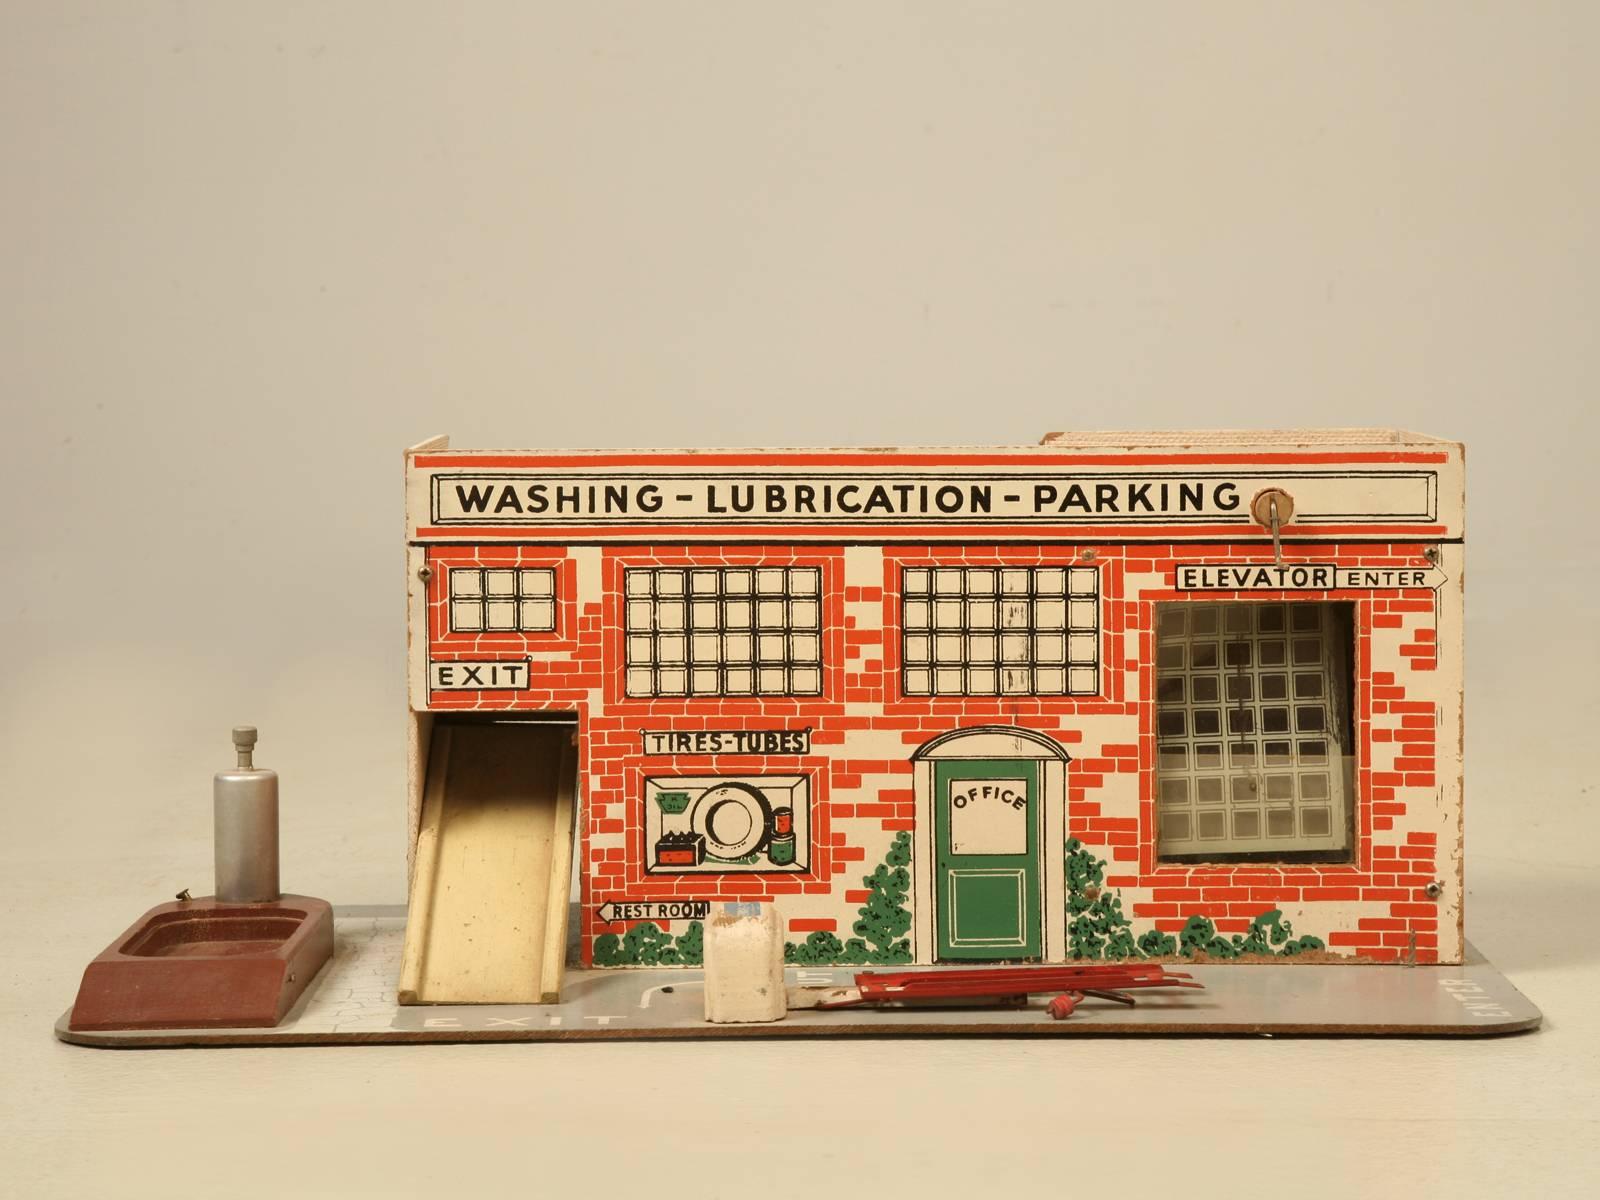 Vintage child’s toy garage probably made in the 1950s for a 1/43rd scale car, such as those made by Dinky and Corgi which we also have available. Considering its age and who used it, this one remains in pretty good all original condition. We do have